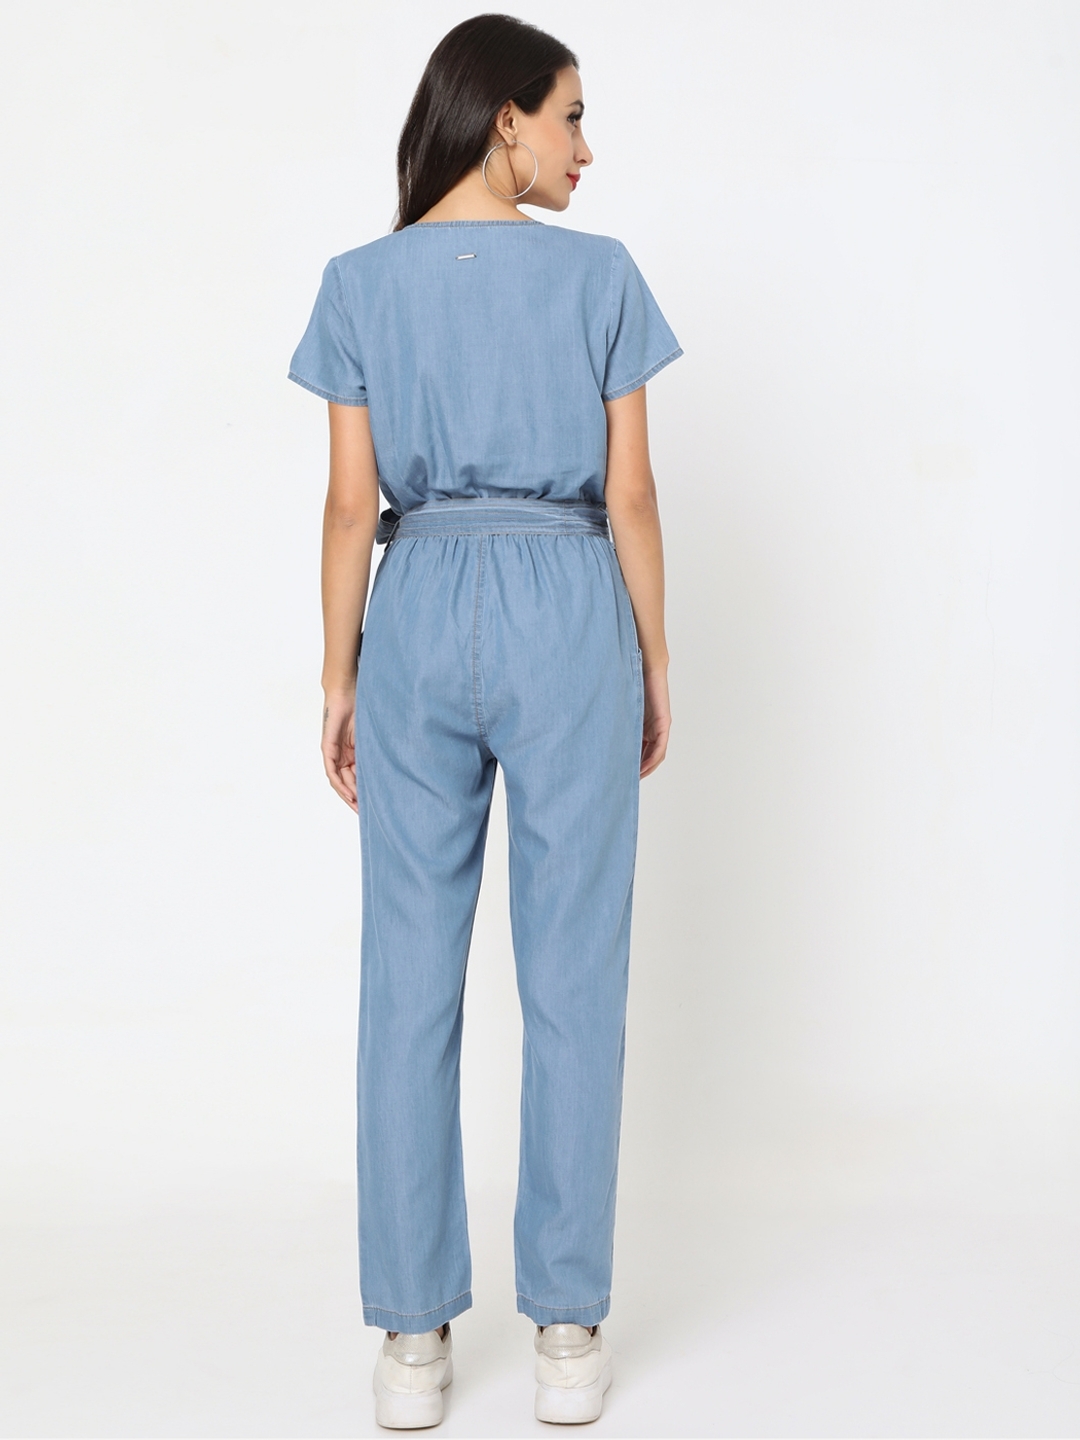 Madewell - switch it up / we love a good jumpsuit tied around the waist  look https://mdwl.co/2SZnHJ8 #denimmadewell | Facebook